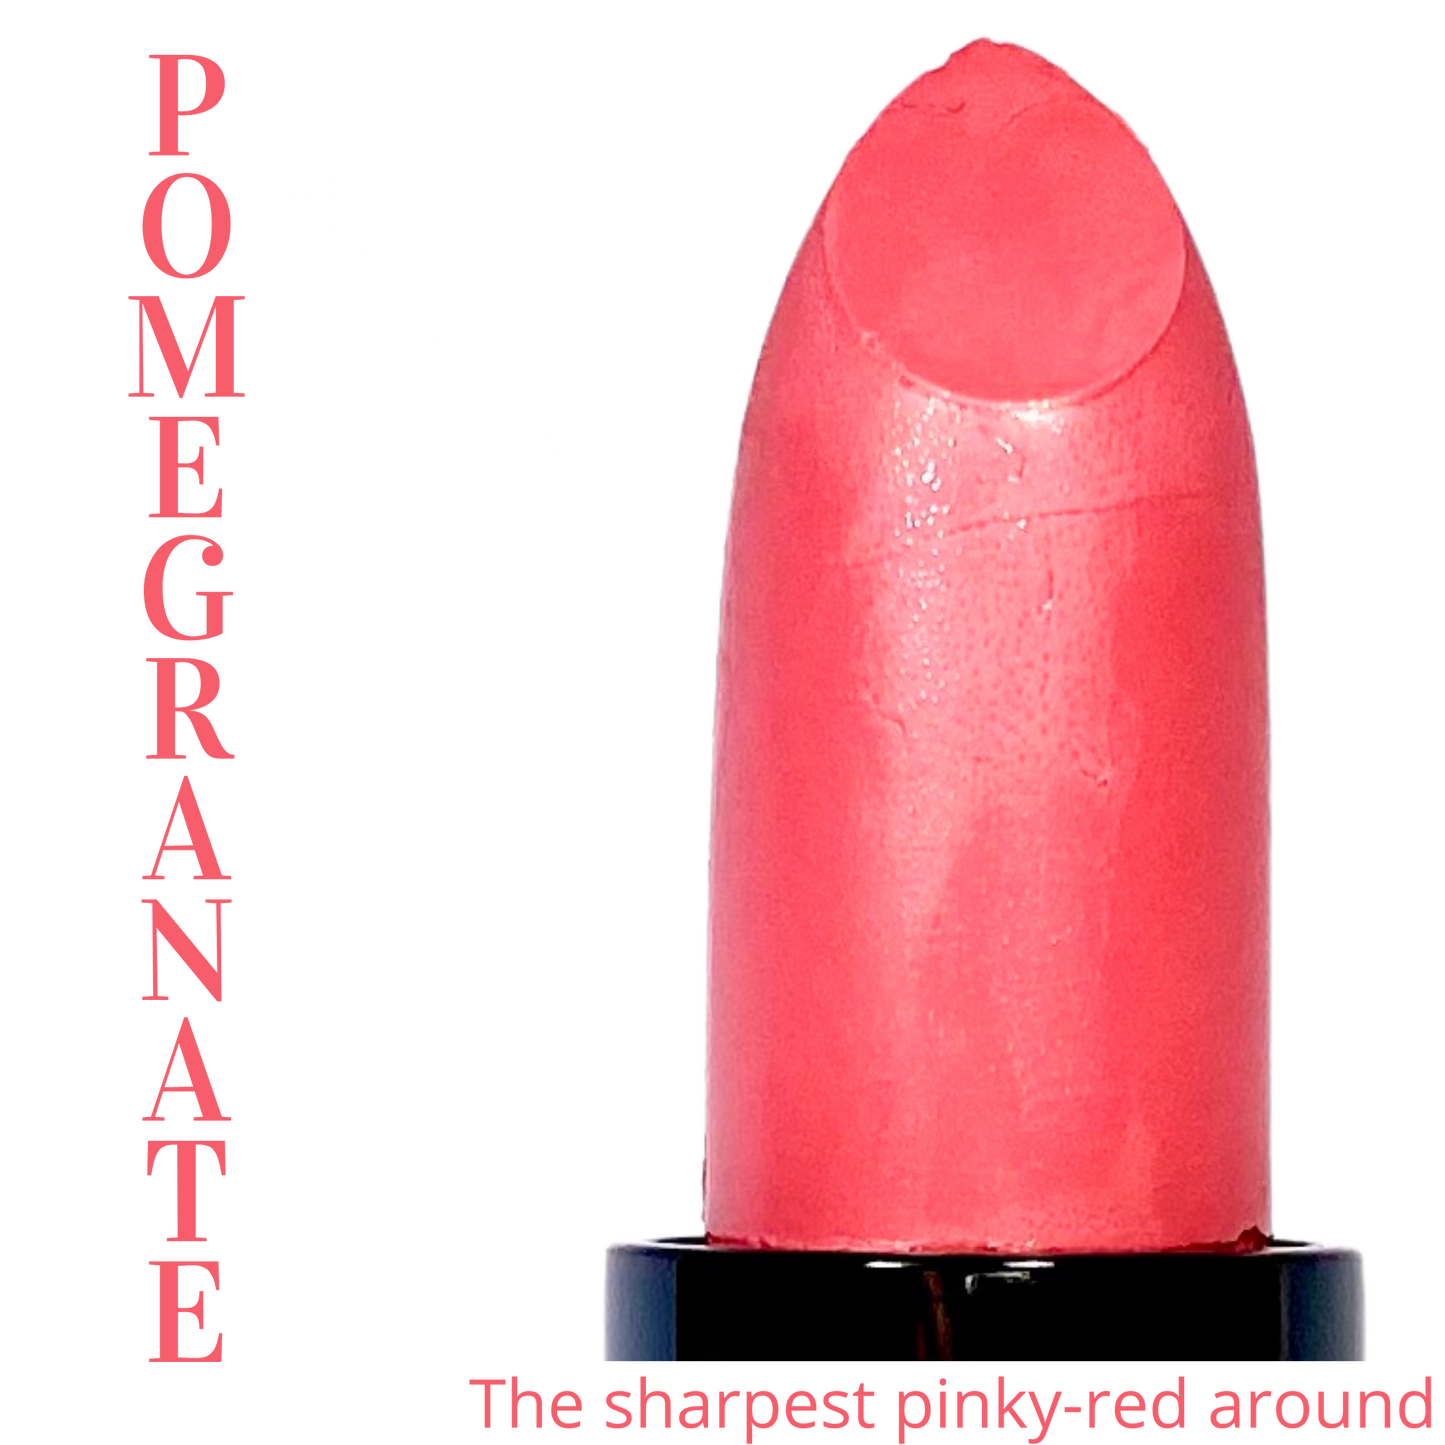 Pomegranate - The sharpest pinky-red around